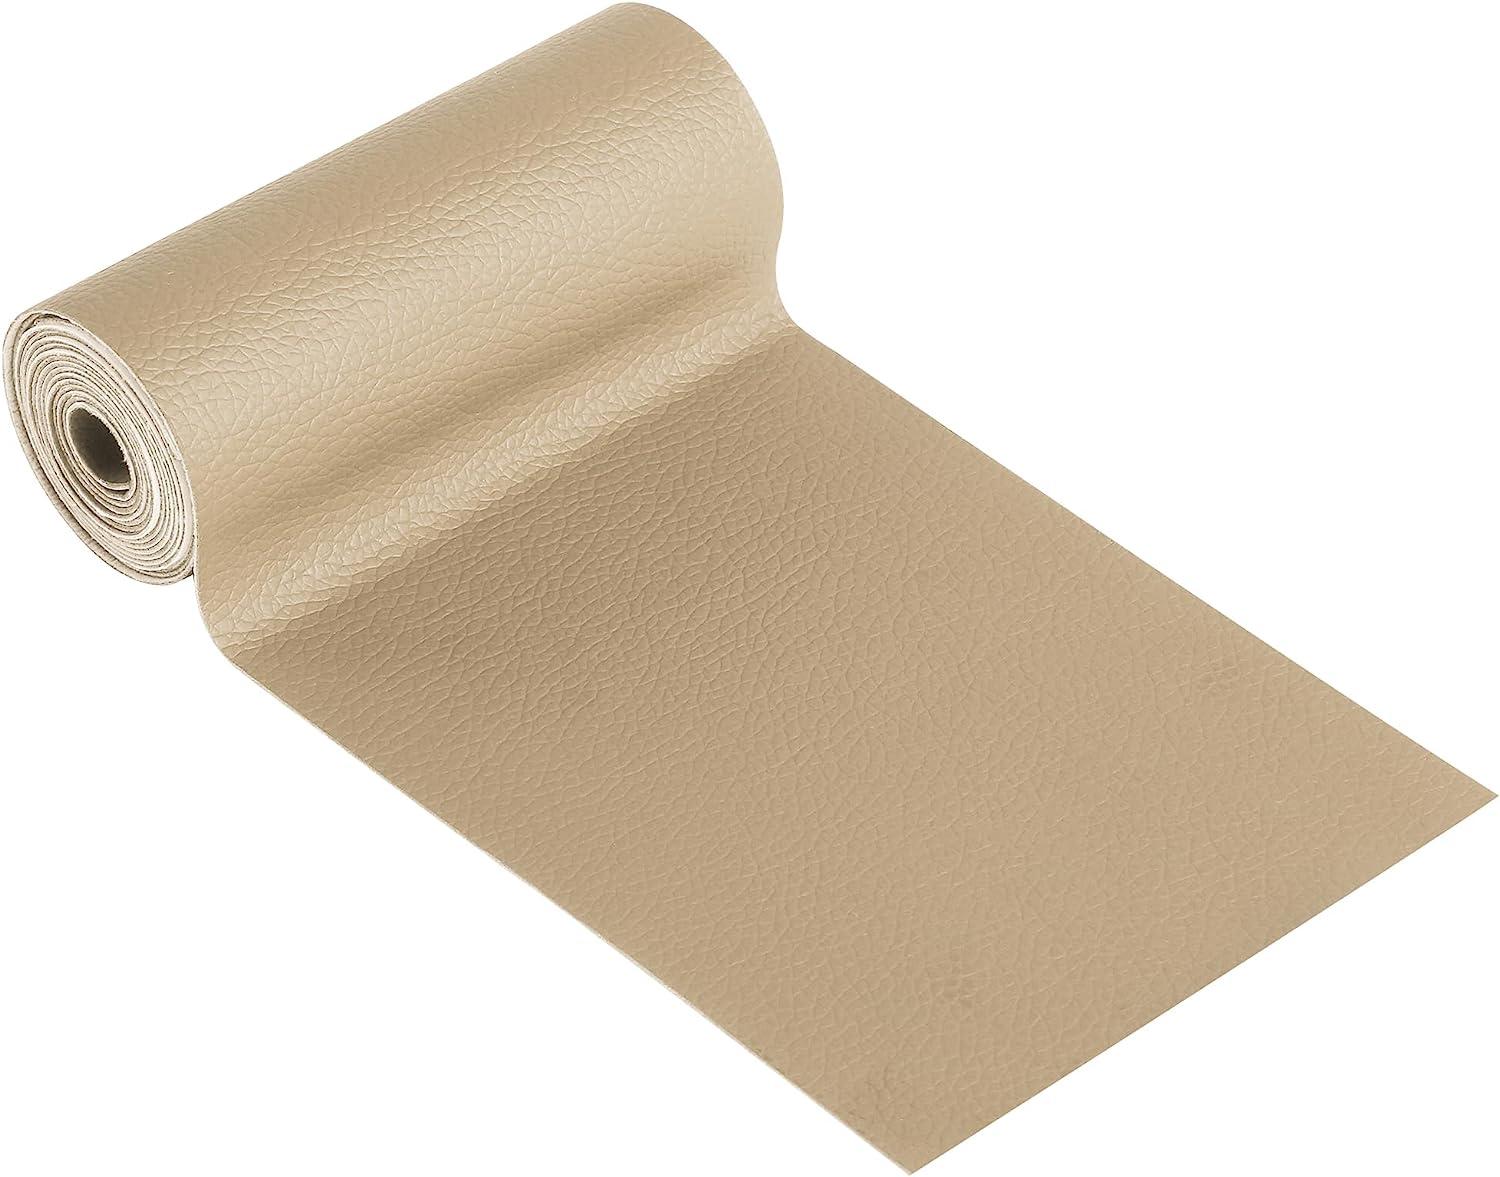 Beige Color Leather and Vinyl Adhesive Repair Patch, Sticky Vinyl